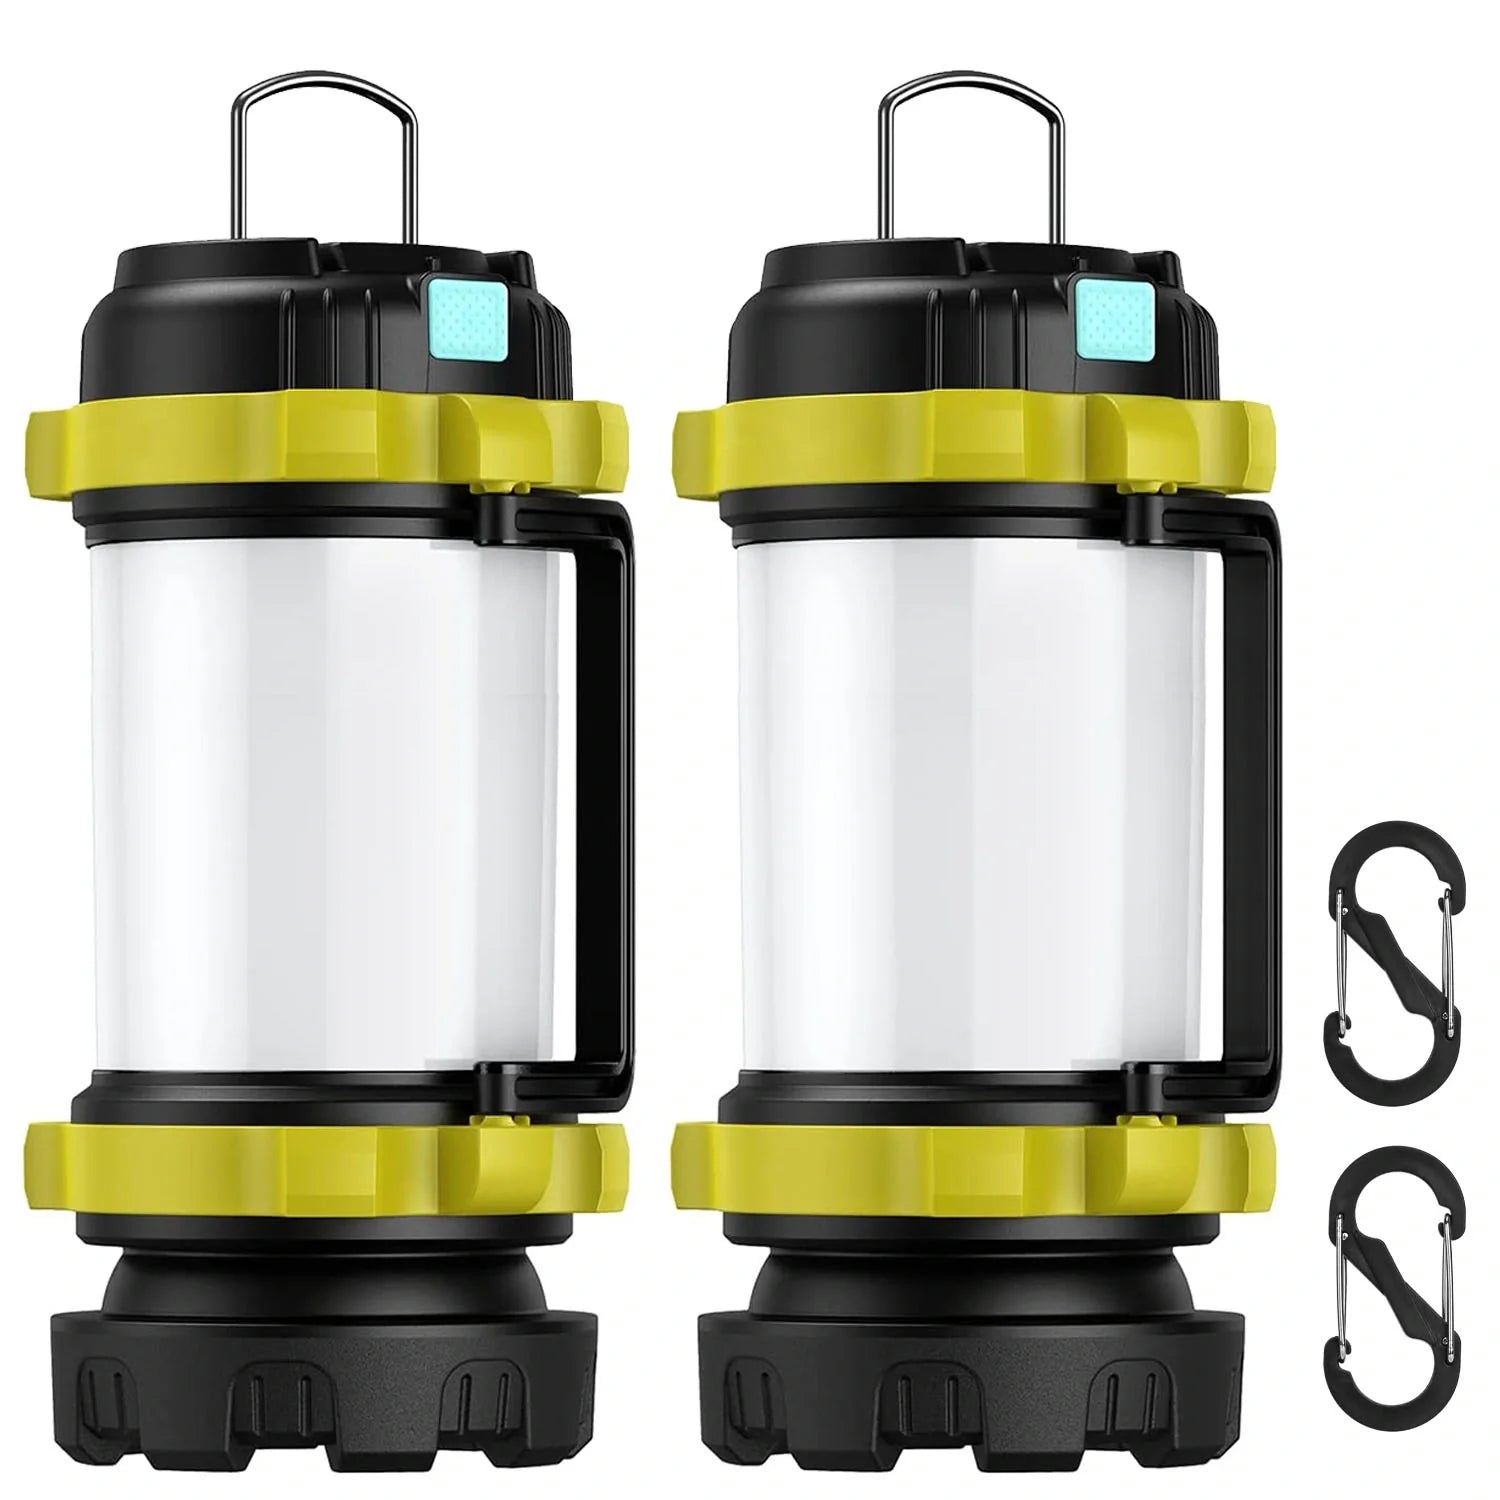 Outdoor Camping Lantern - Emergency Light 6 Lighting Modes Rechargeable Outdoor Activities Camping, Hiking, Lantern (2Pcs)